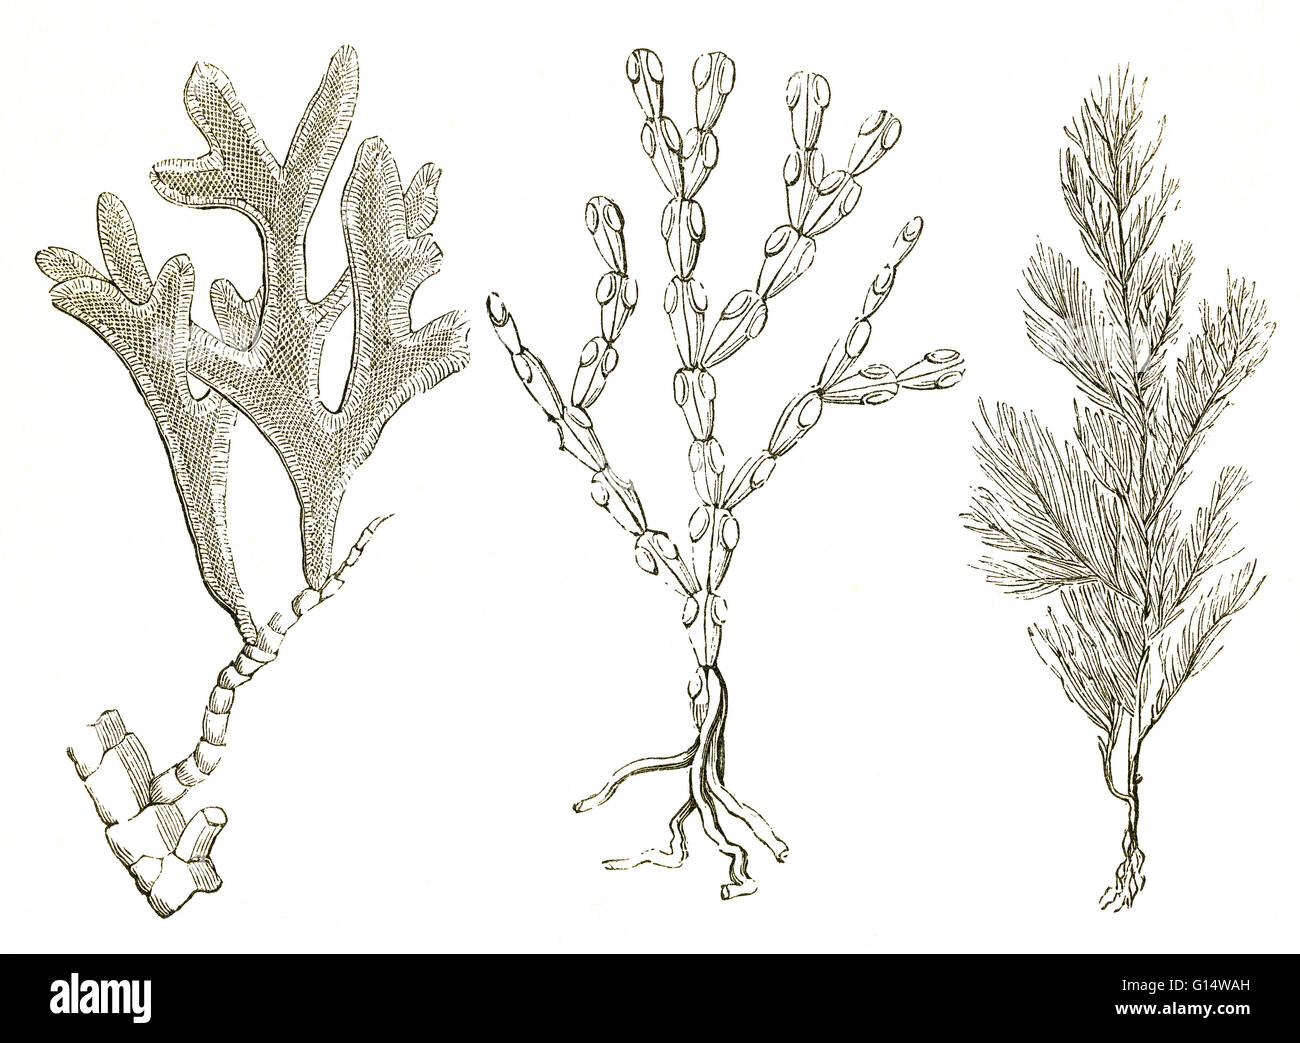 Bryozoans from the Jurassic Period. On the left is Adeona folifera, and on the right, two specimens of Cellaria loriculata.  Illustration from Louis Figuier's The World Before the Deluge, 1867 American edition. Stock Photo